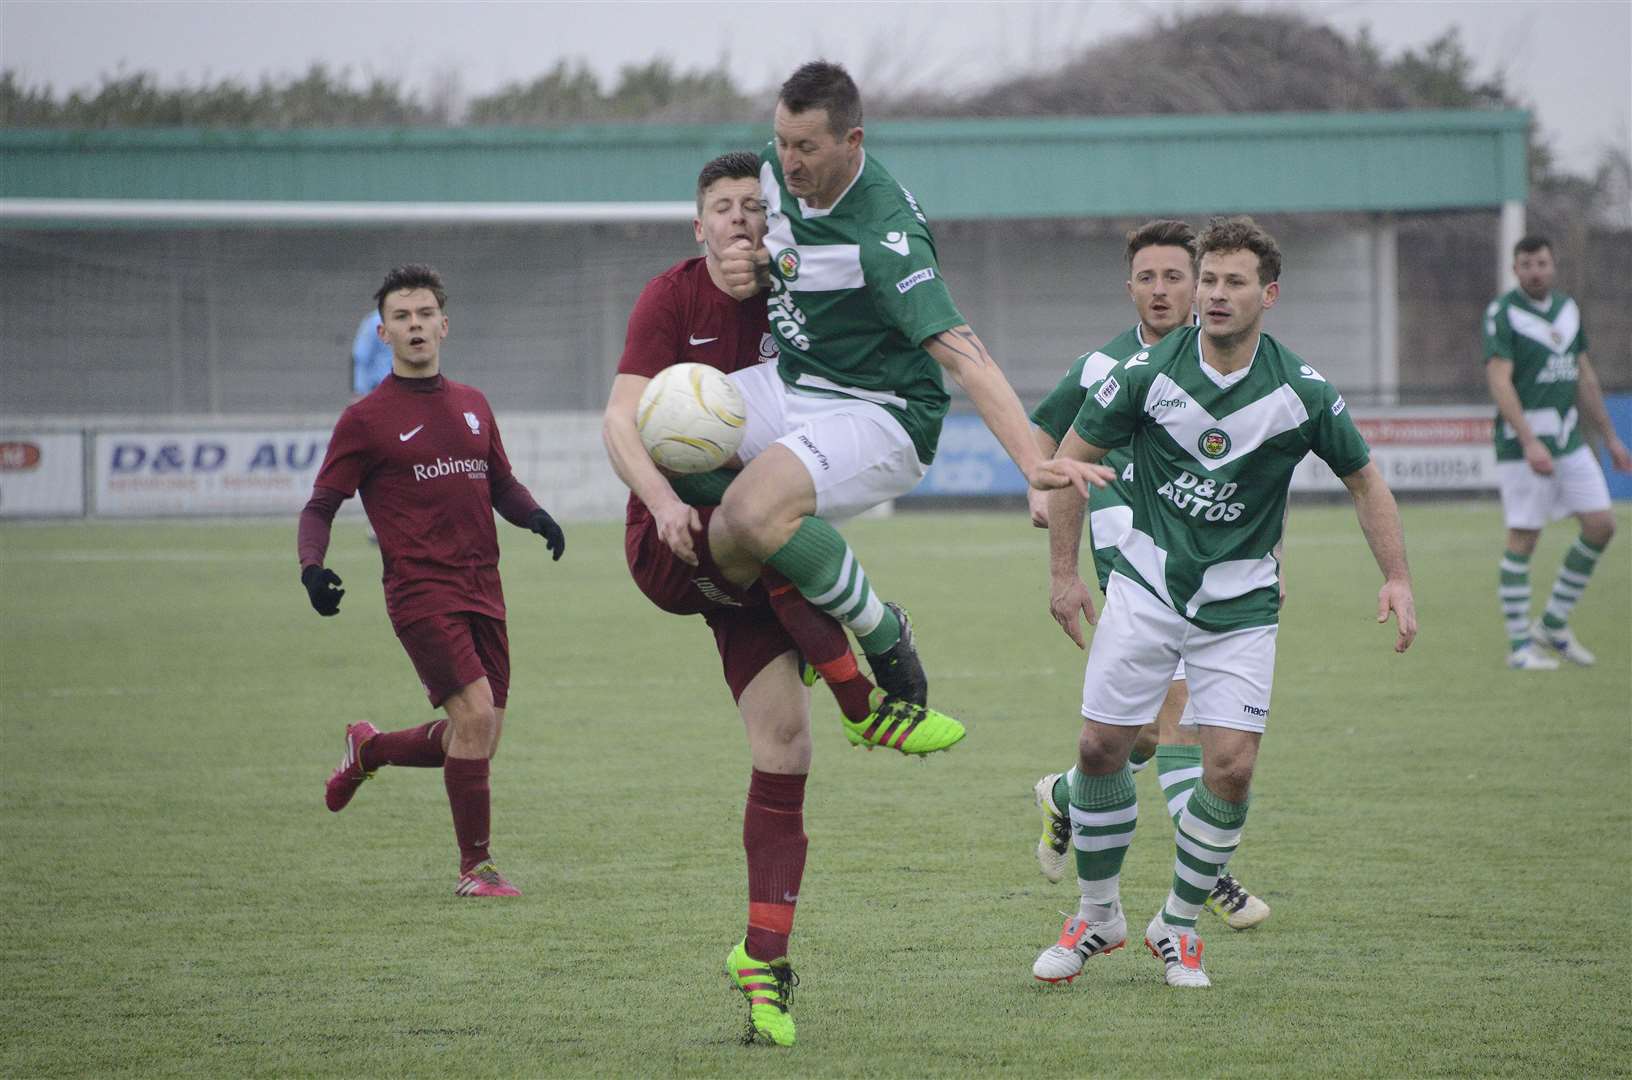 Alfie Nunn (left, in burgundy) competing for the ball during a game against Ashford